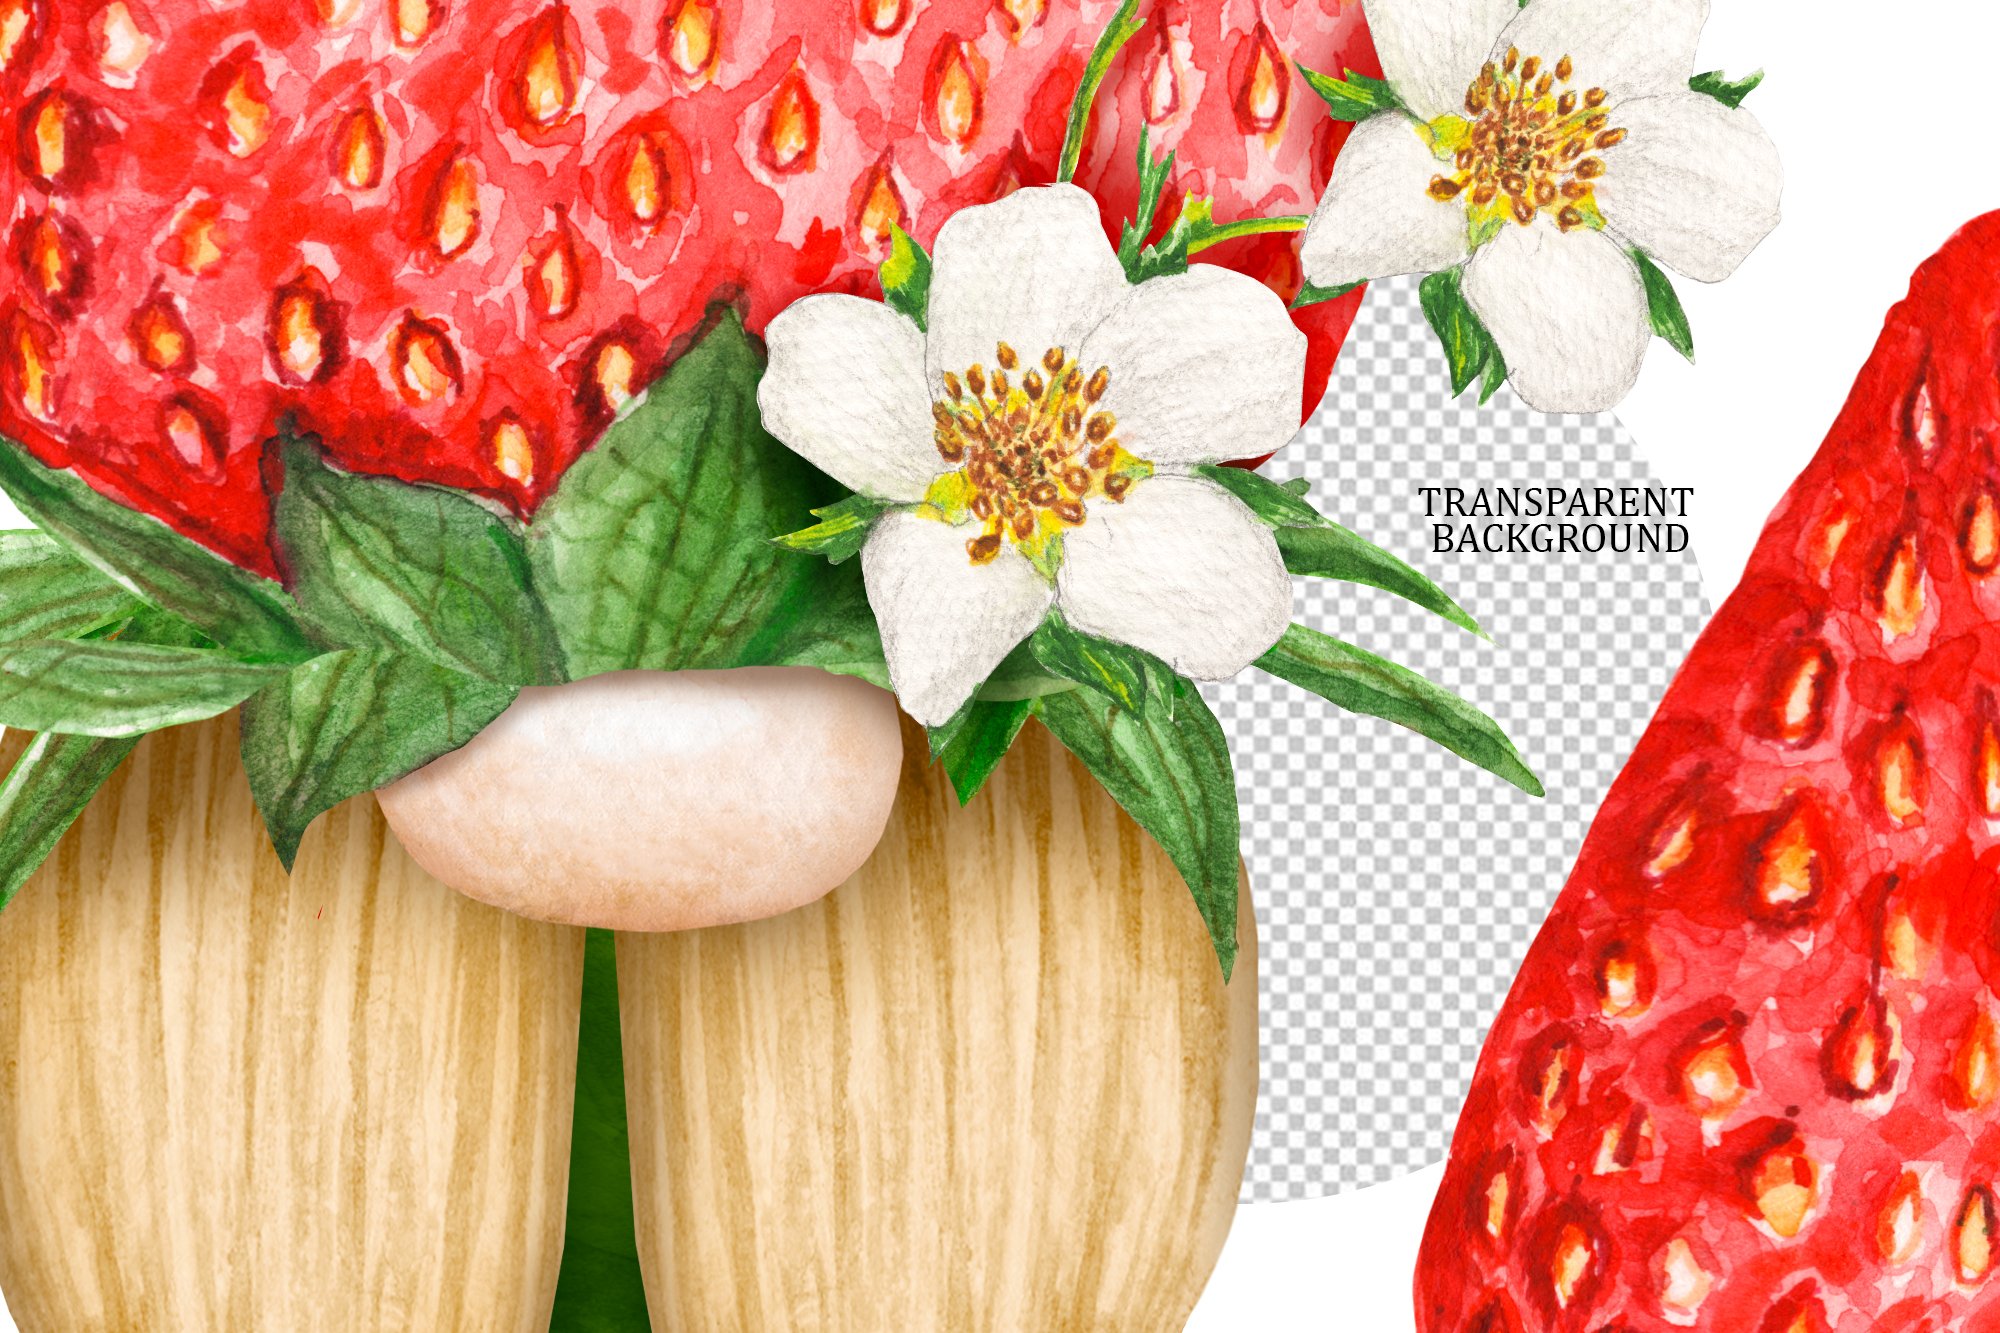 Illustration in close-up of a gnome strawberry on a transparent background.